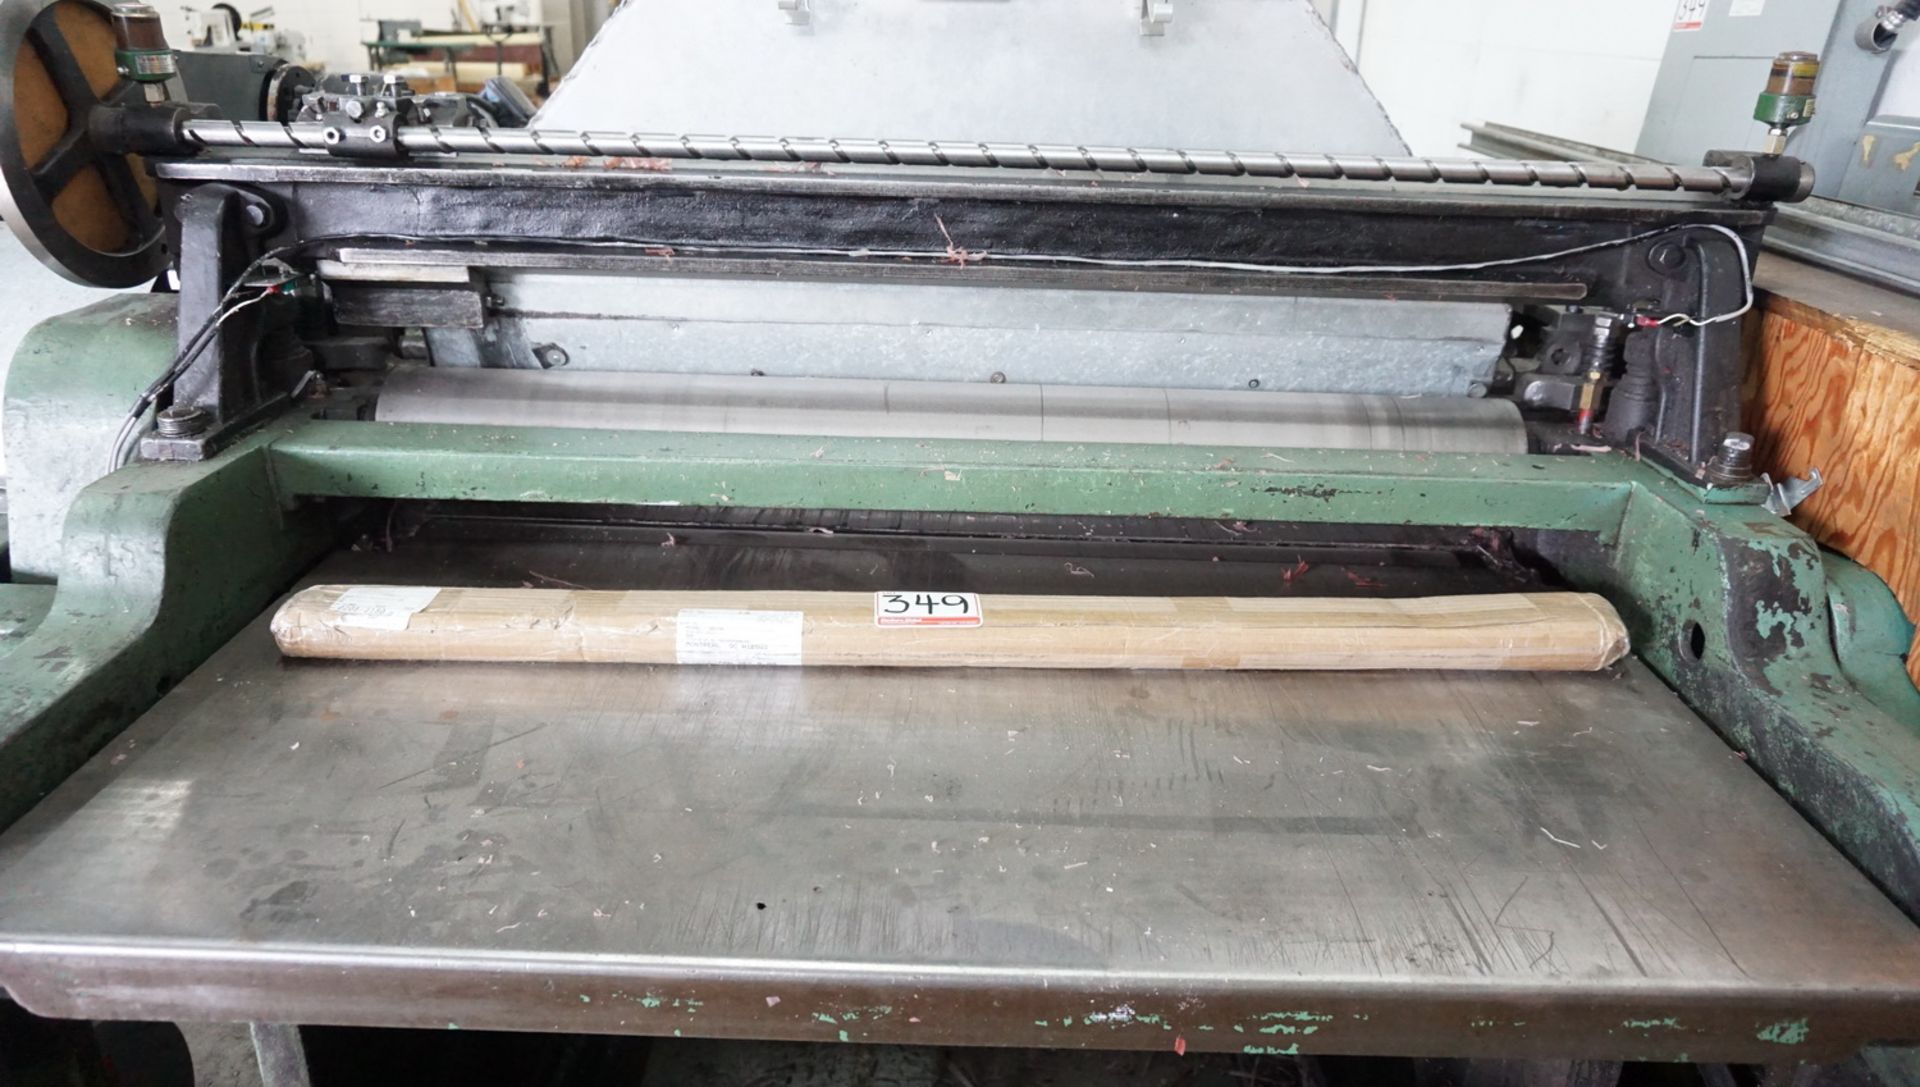 BUSS MACHINE WORKS 30HP 40" STRAIGHT KNIFE BLOCK PLANER, S/N 89-4-174 (208-220 / 440V) C/W SPARE - Image 2 of 7